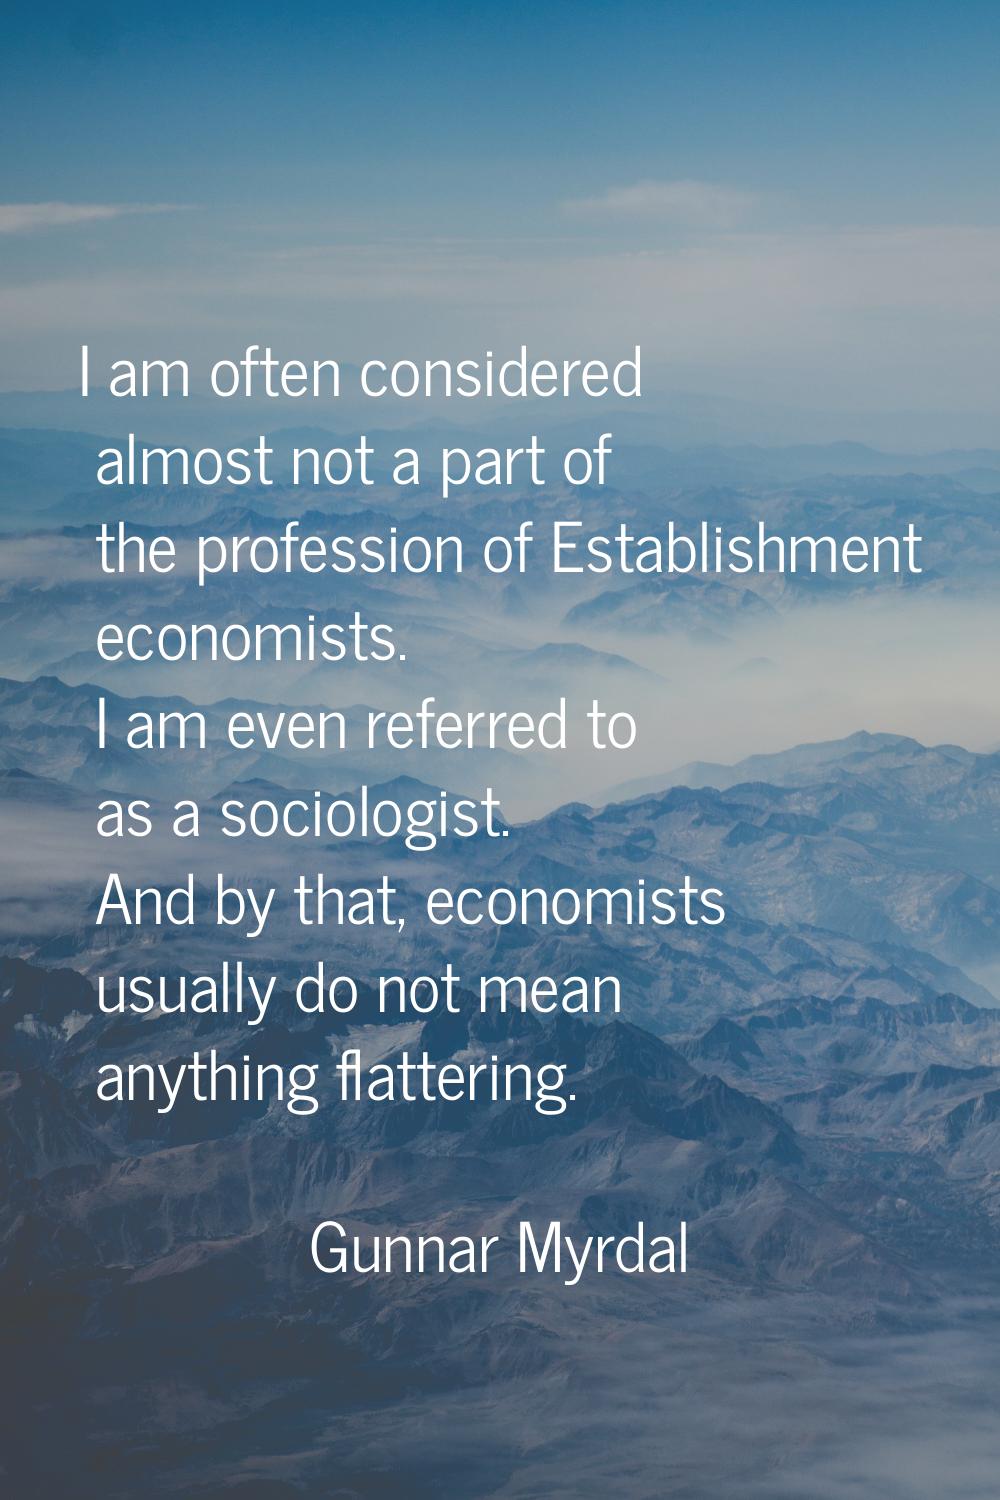 I am often considered almost not a part of the profession of Establishment economists. I am even re